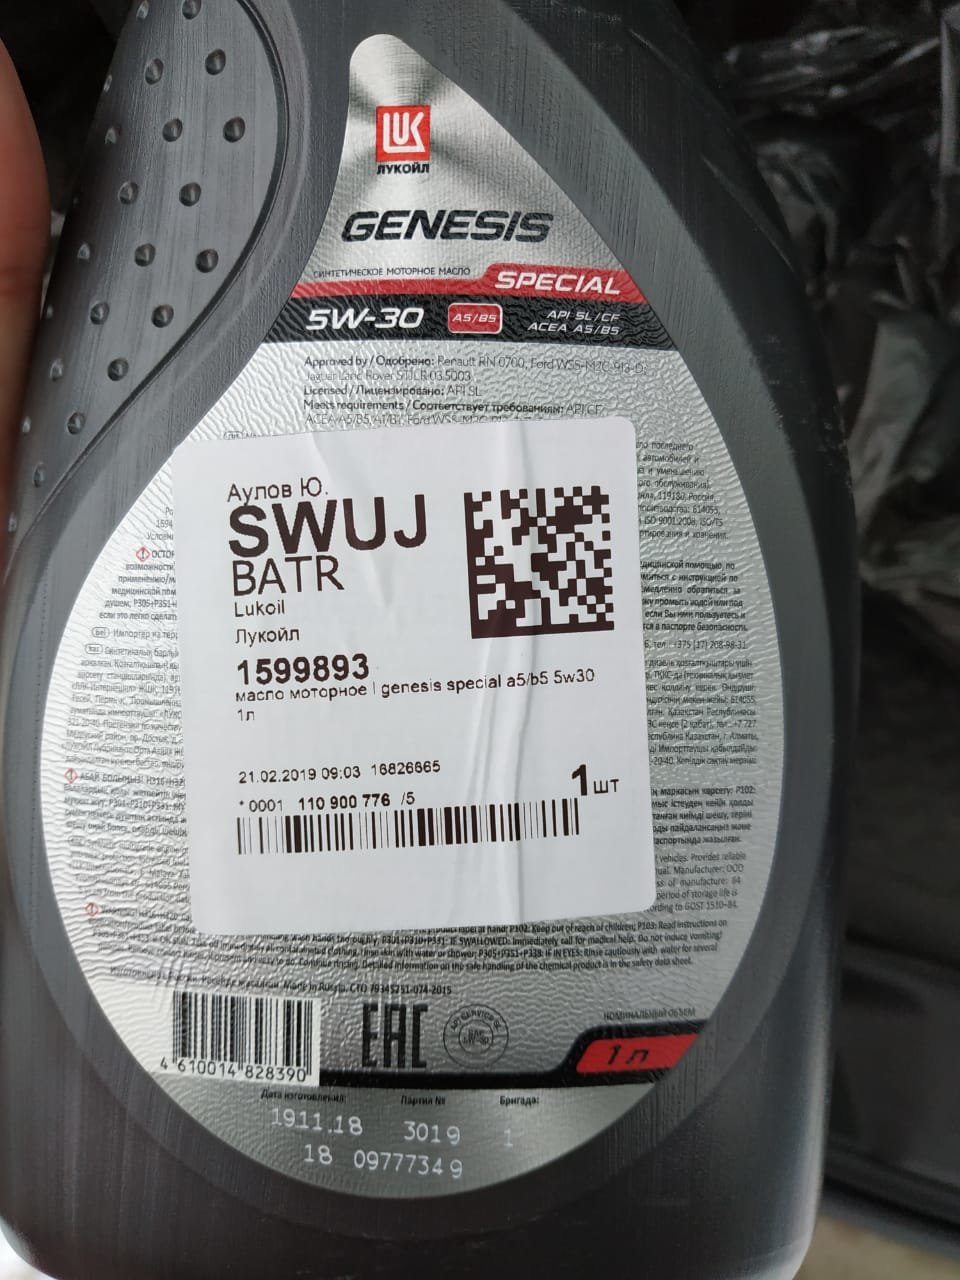 Lukoil Genesis Special a5/b5 5w-30. Лукойл Special 5w30 a5 b5. Масло лукойл special 5w30